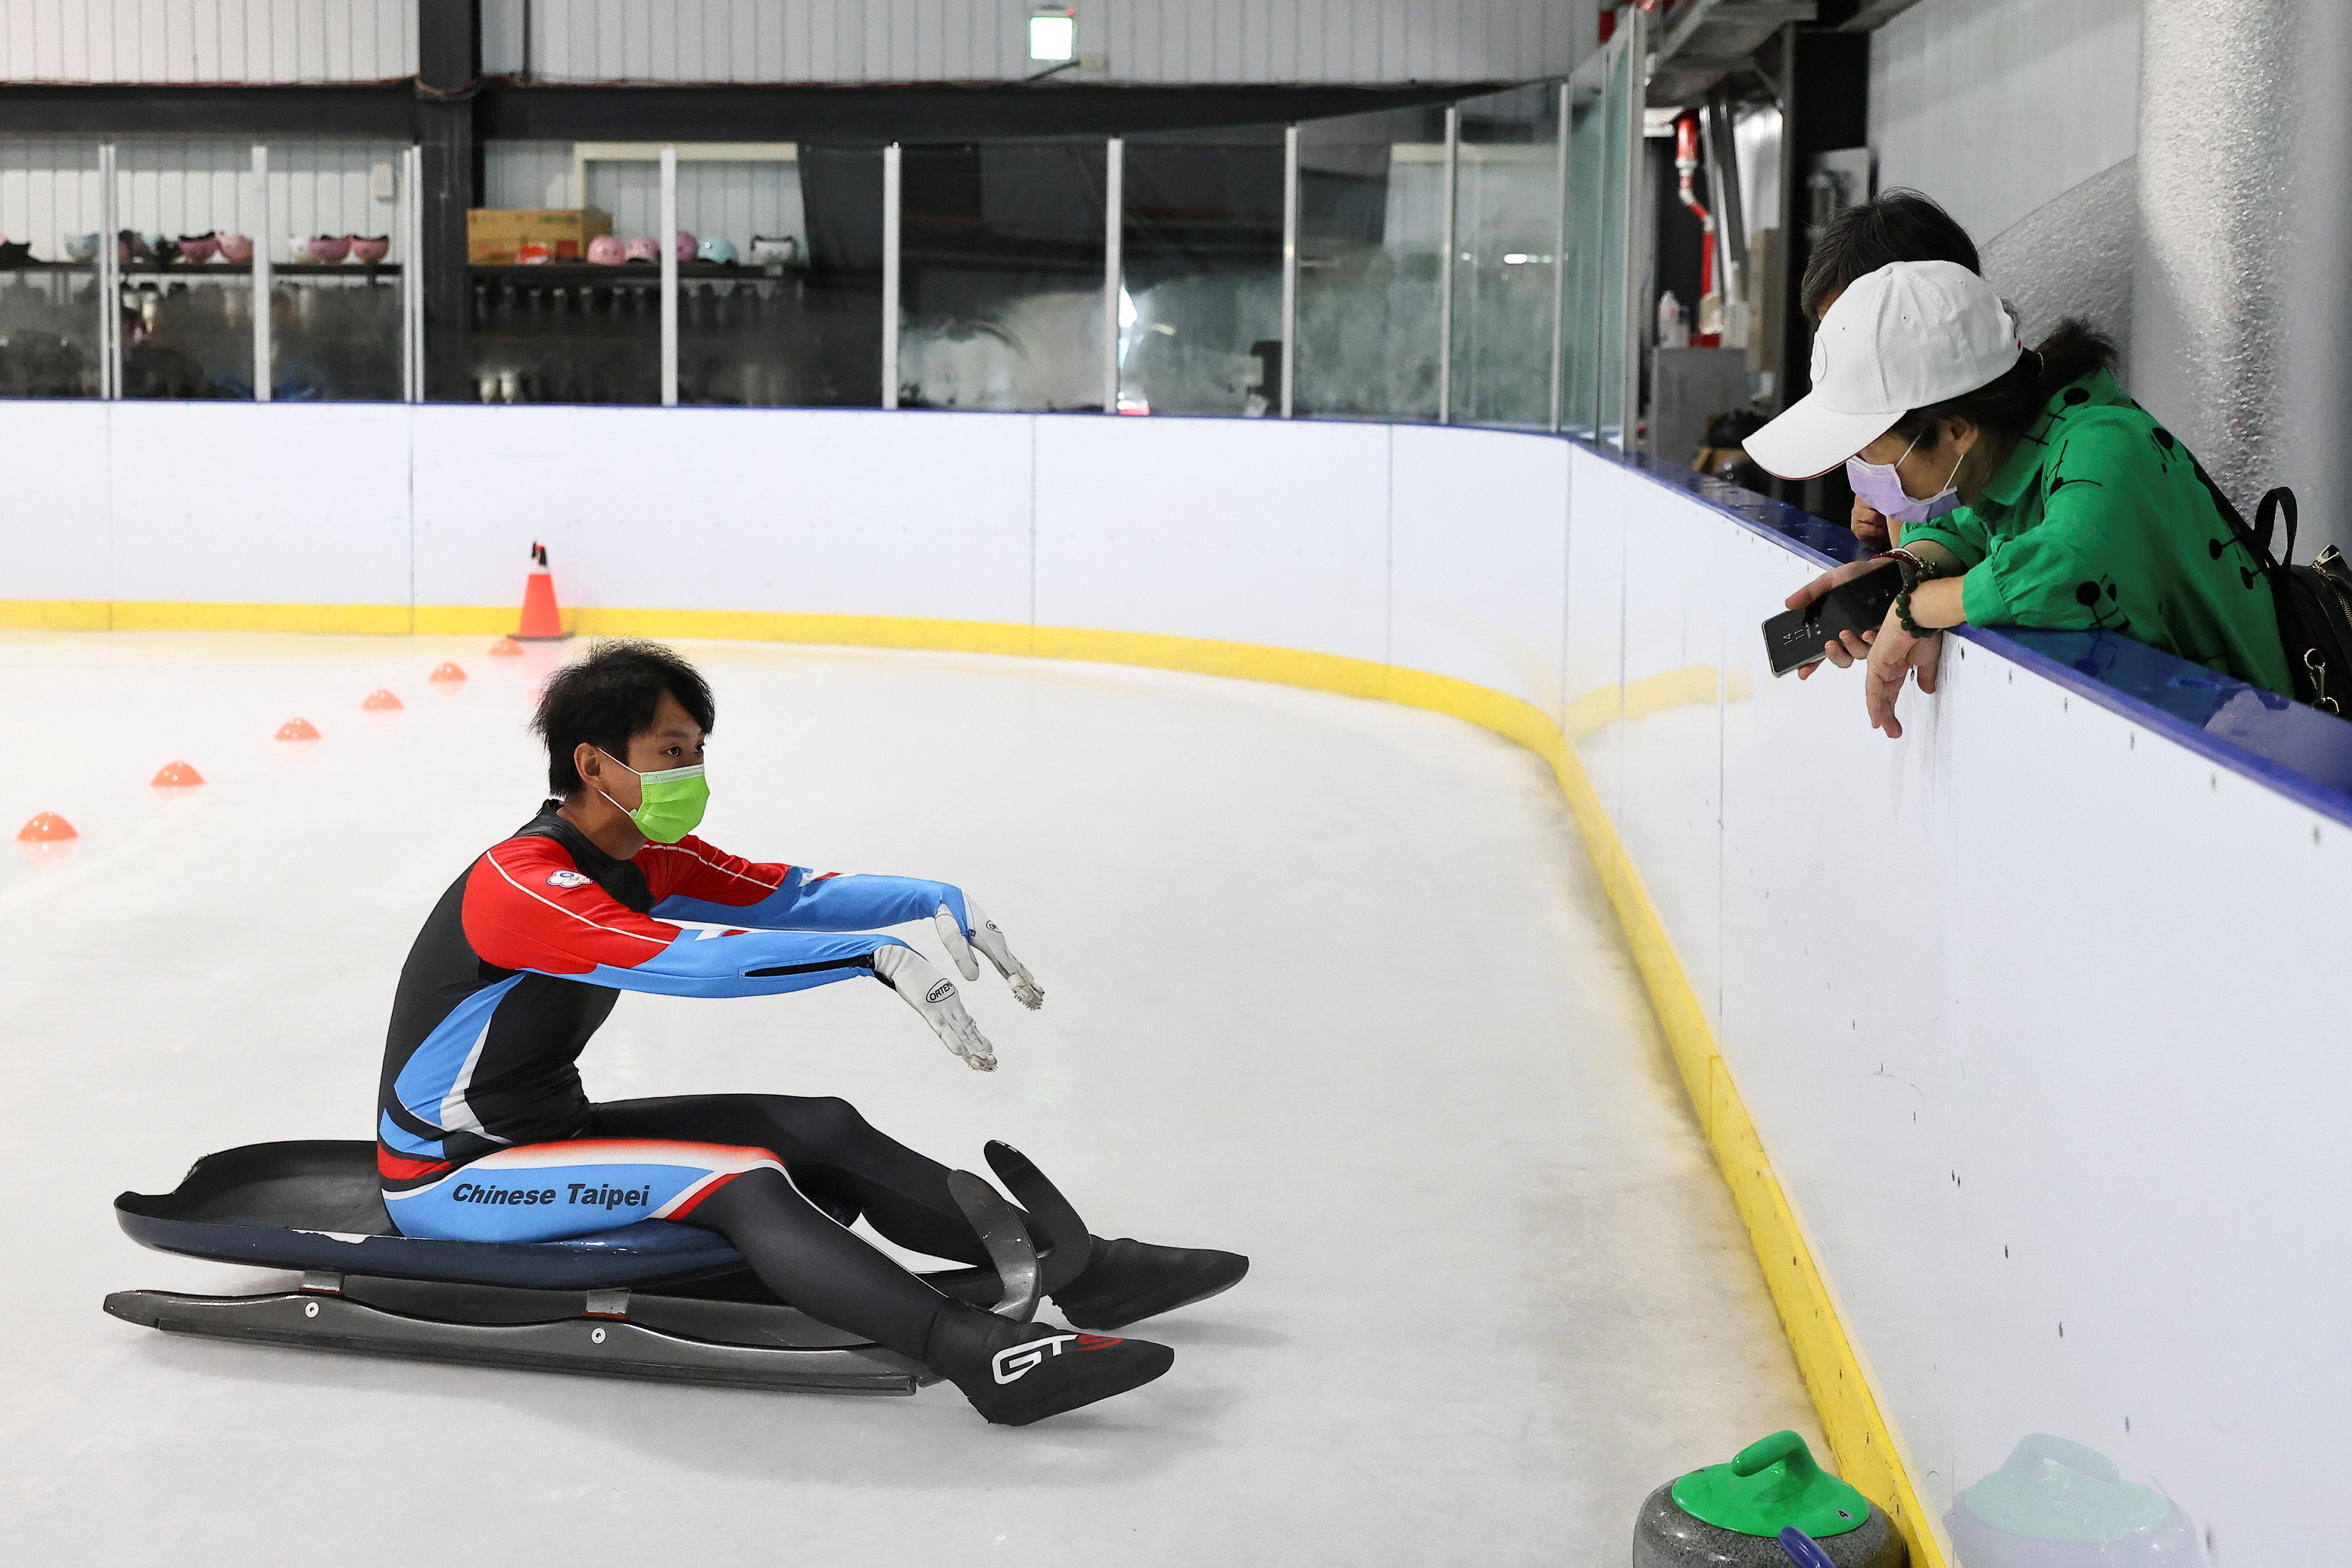 Li Sin-rong, 23, a Taiwanese luger, shows her gloves to her family and colleagues during a practice session at the ice skating range, as part of her training to qualify for the 2022 Beijing Winter Olympic Games, in Taoyuan, Taiwan October 2, 2021. Picture taken October 2, 2021. REUTERS/Ann Wang